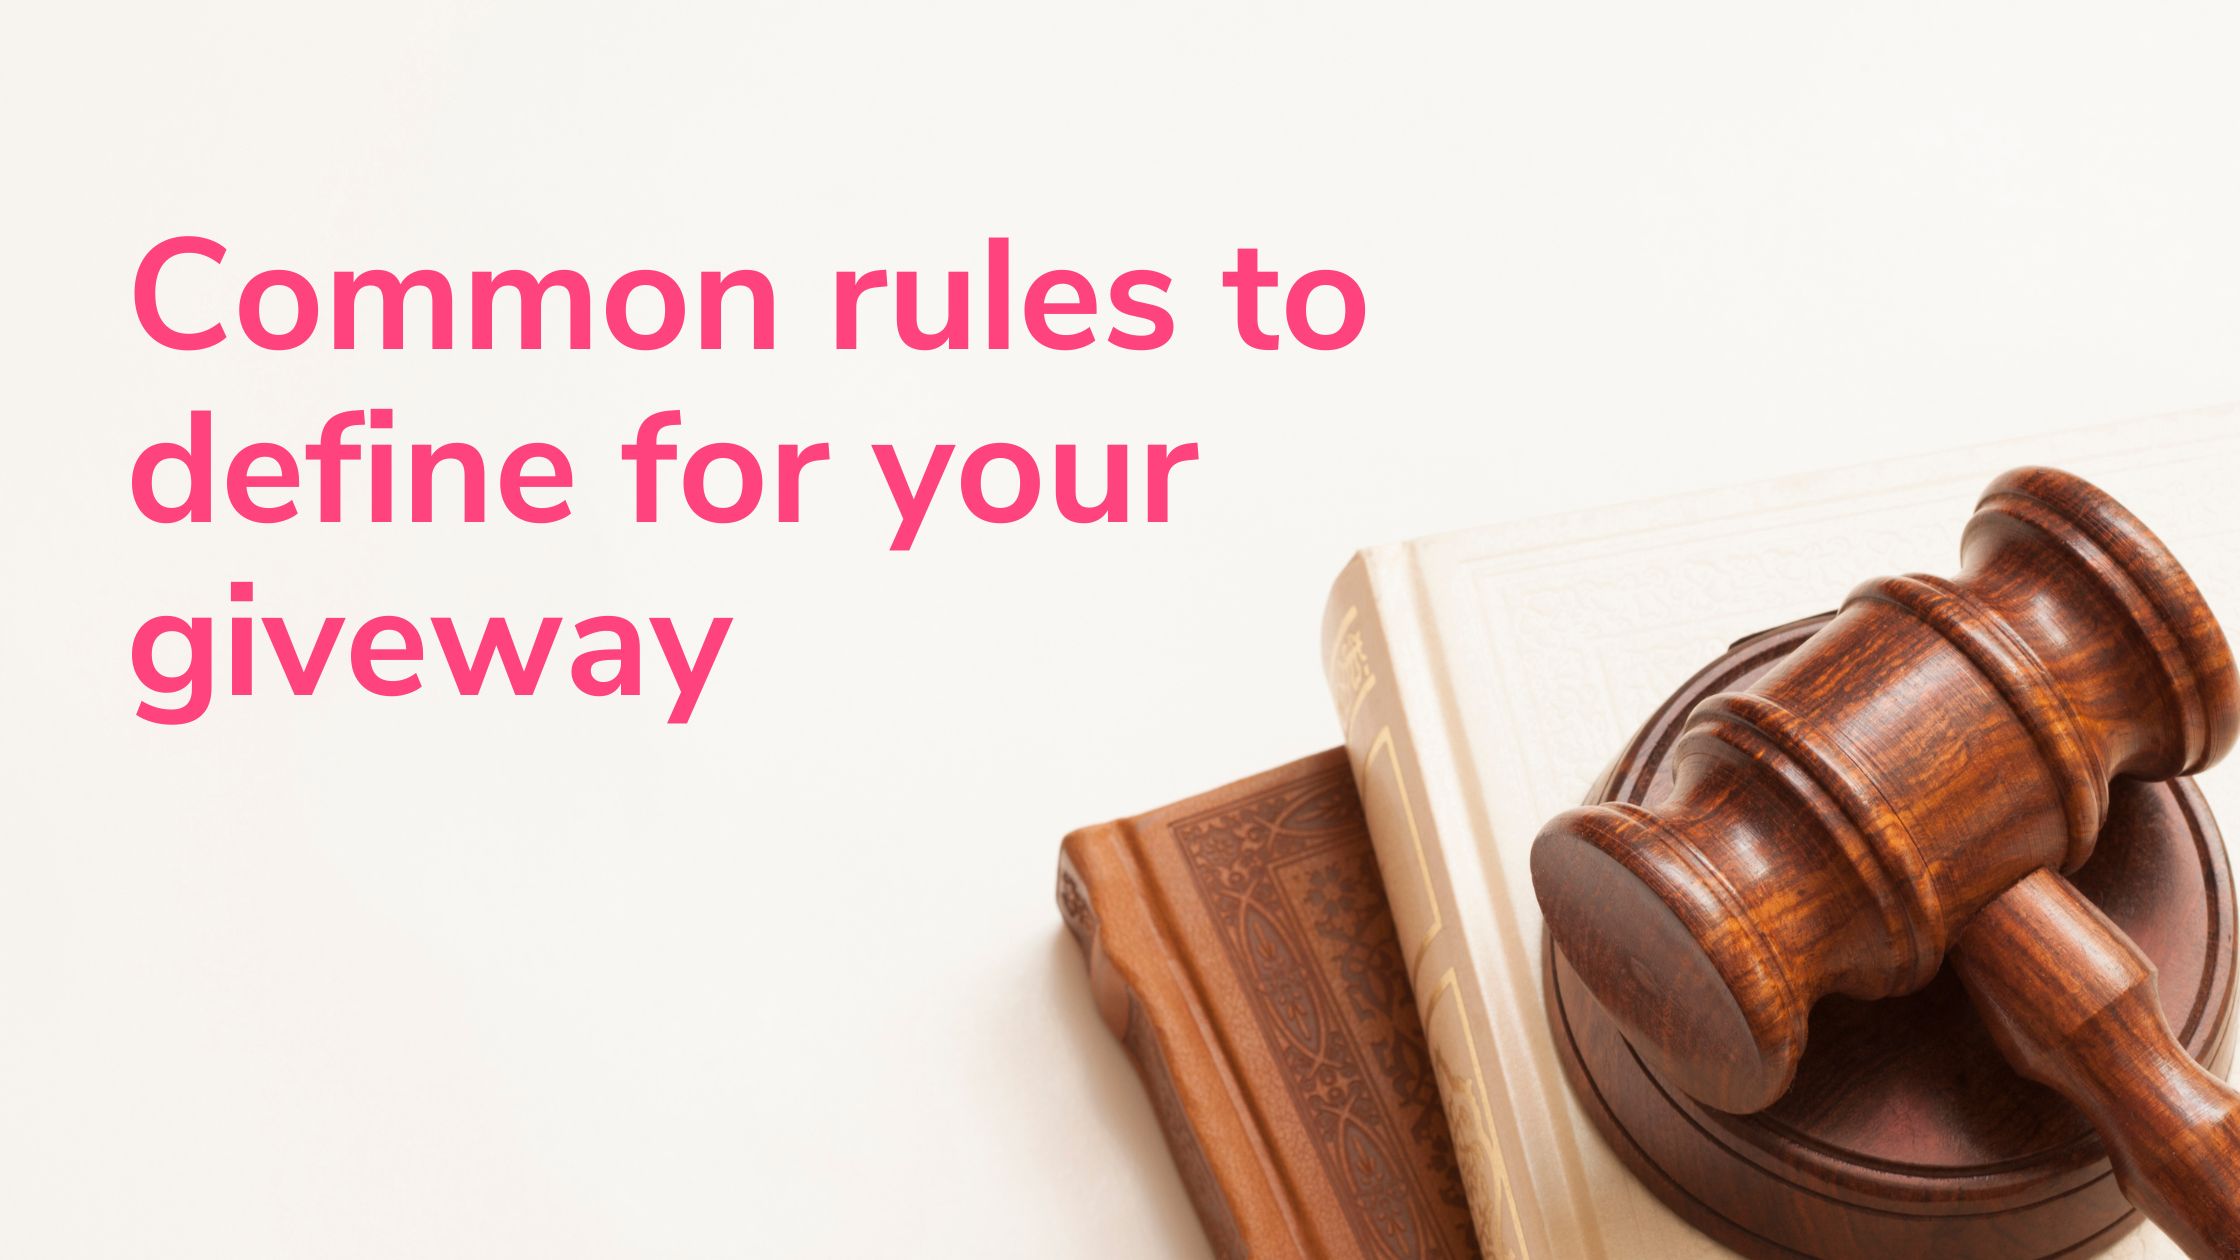 Common rules to define for your giveaway